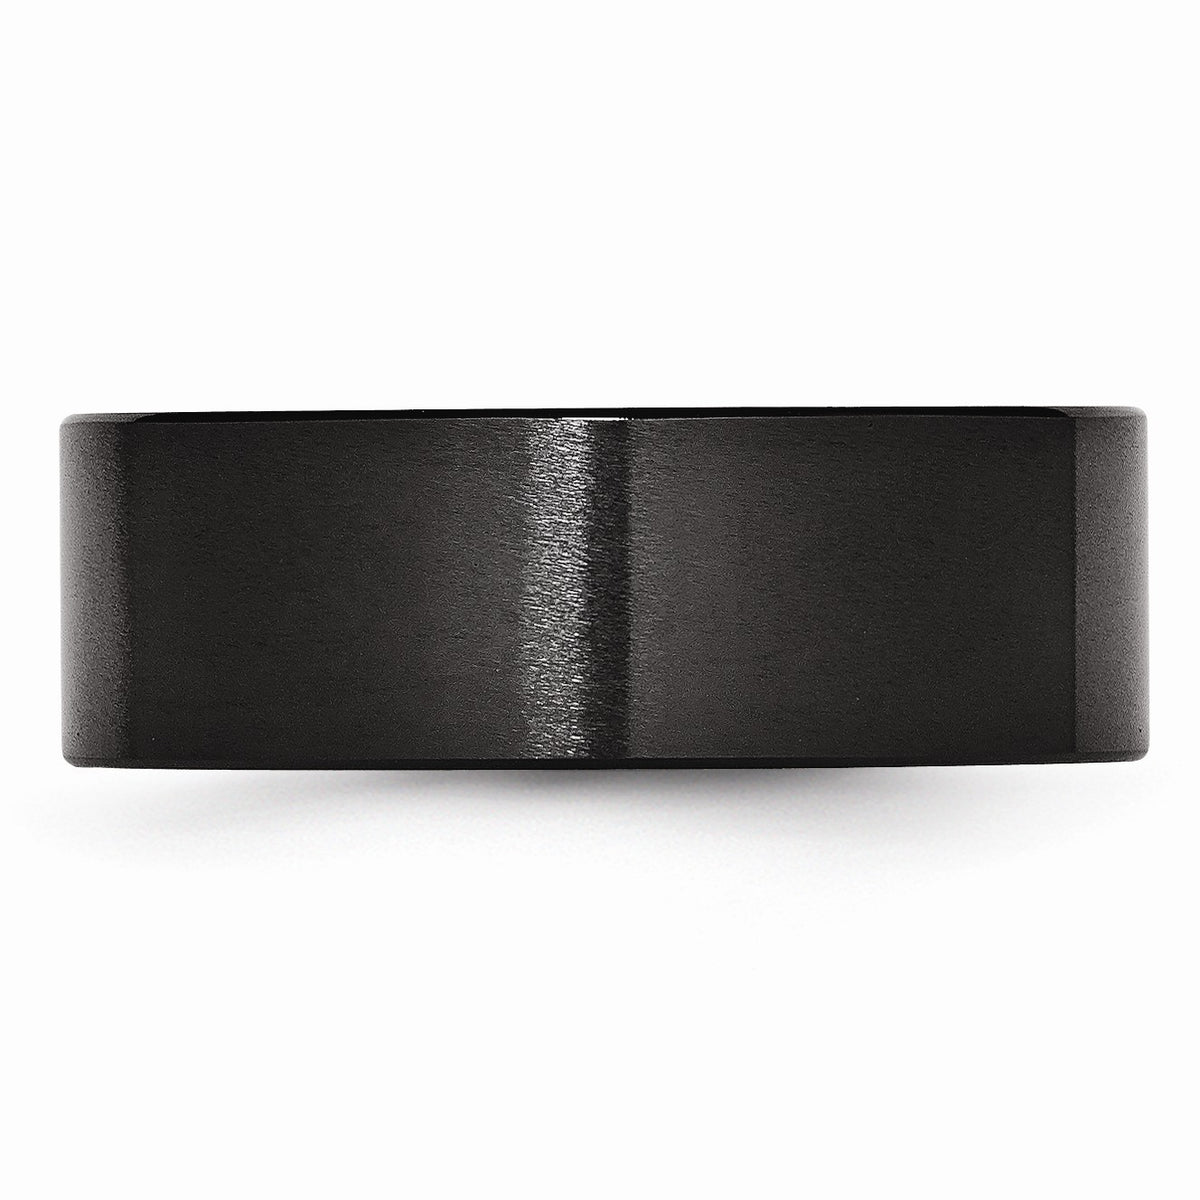 Alternate view of the Black Ceramic, 8mm Flat Brushed Comfort Fit Band by The Black Bow Jewelry Co.